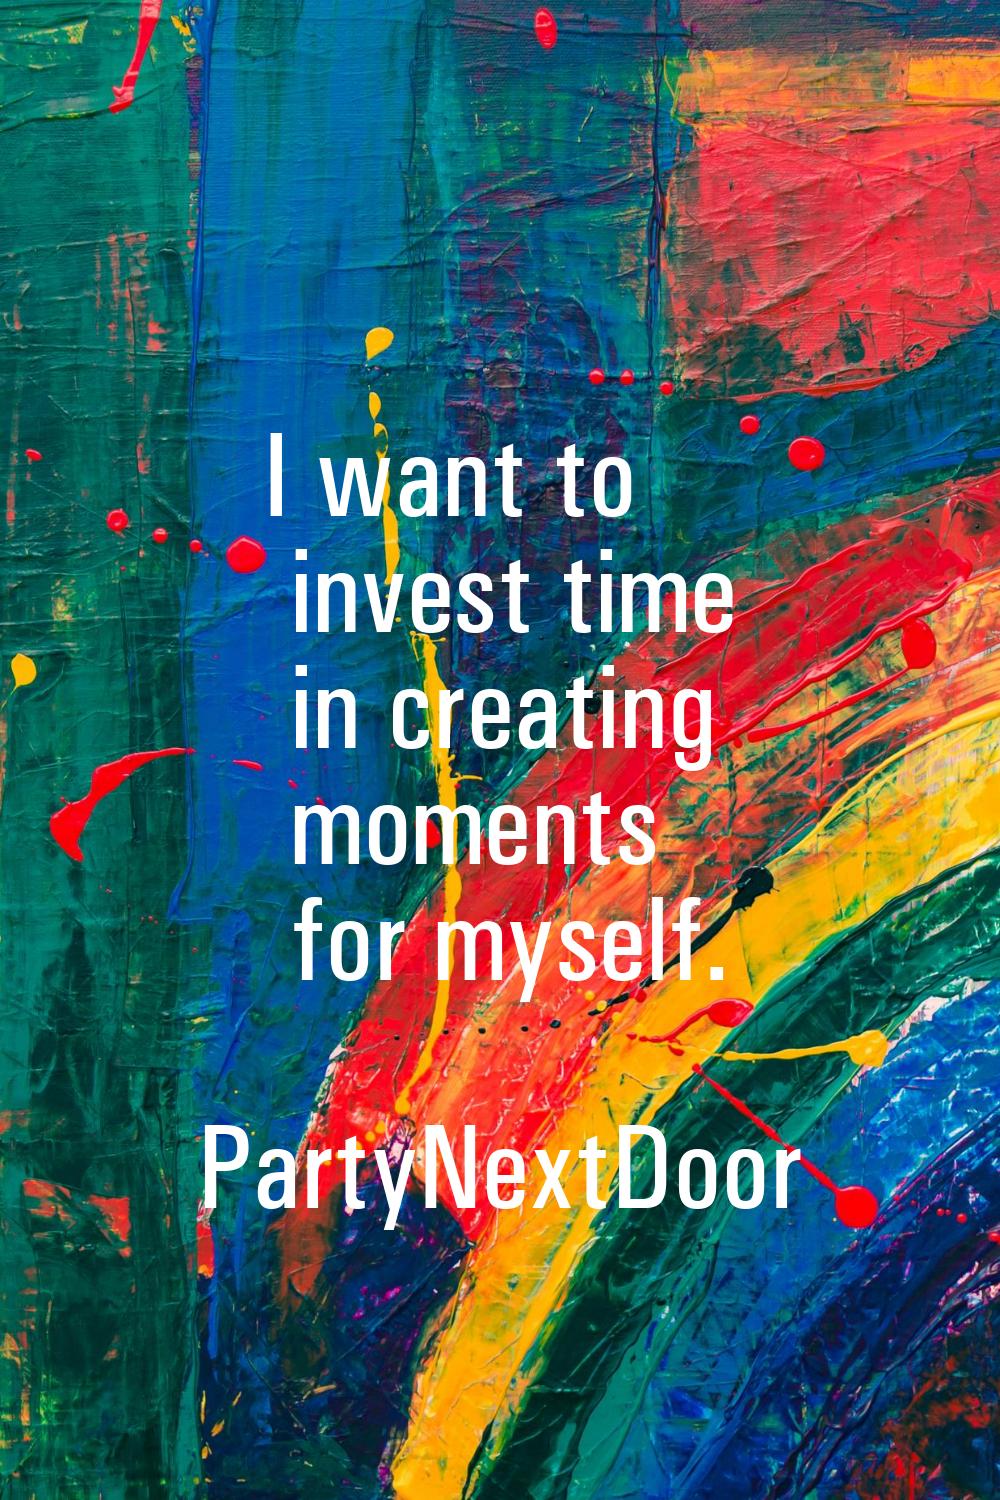 I want to invest time in creating moments for myself.